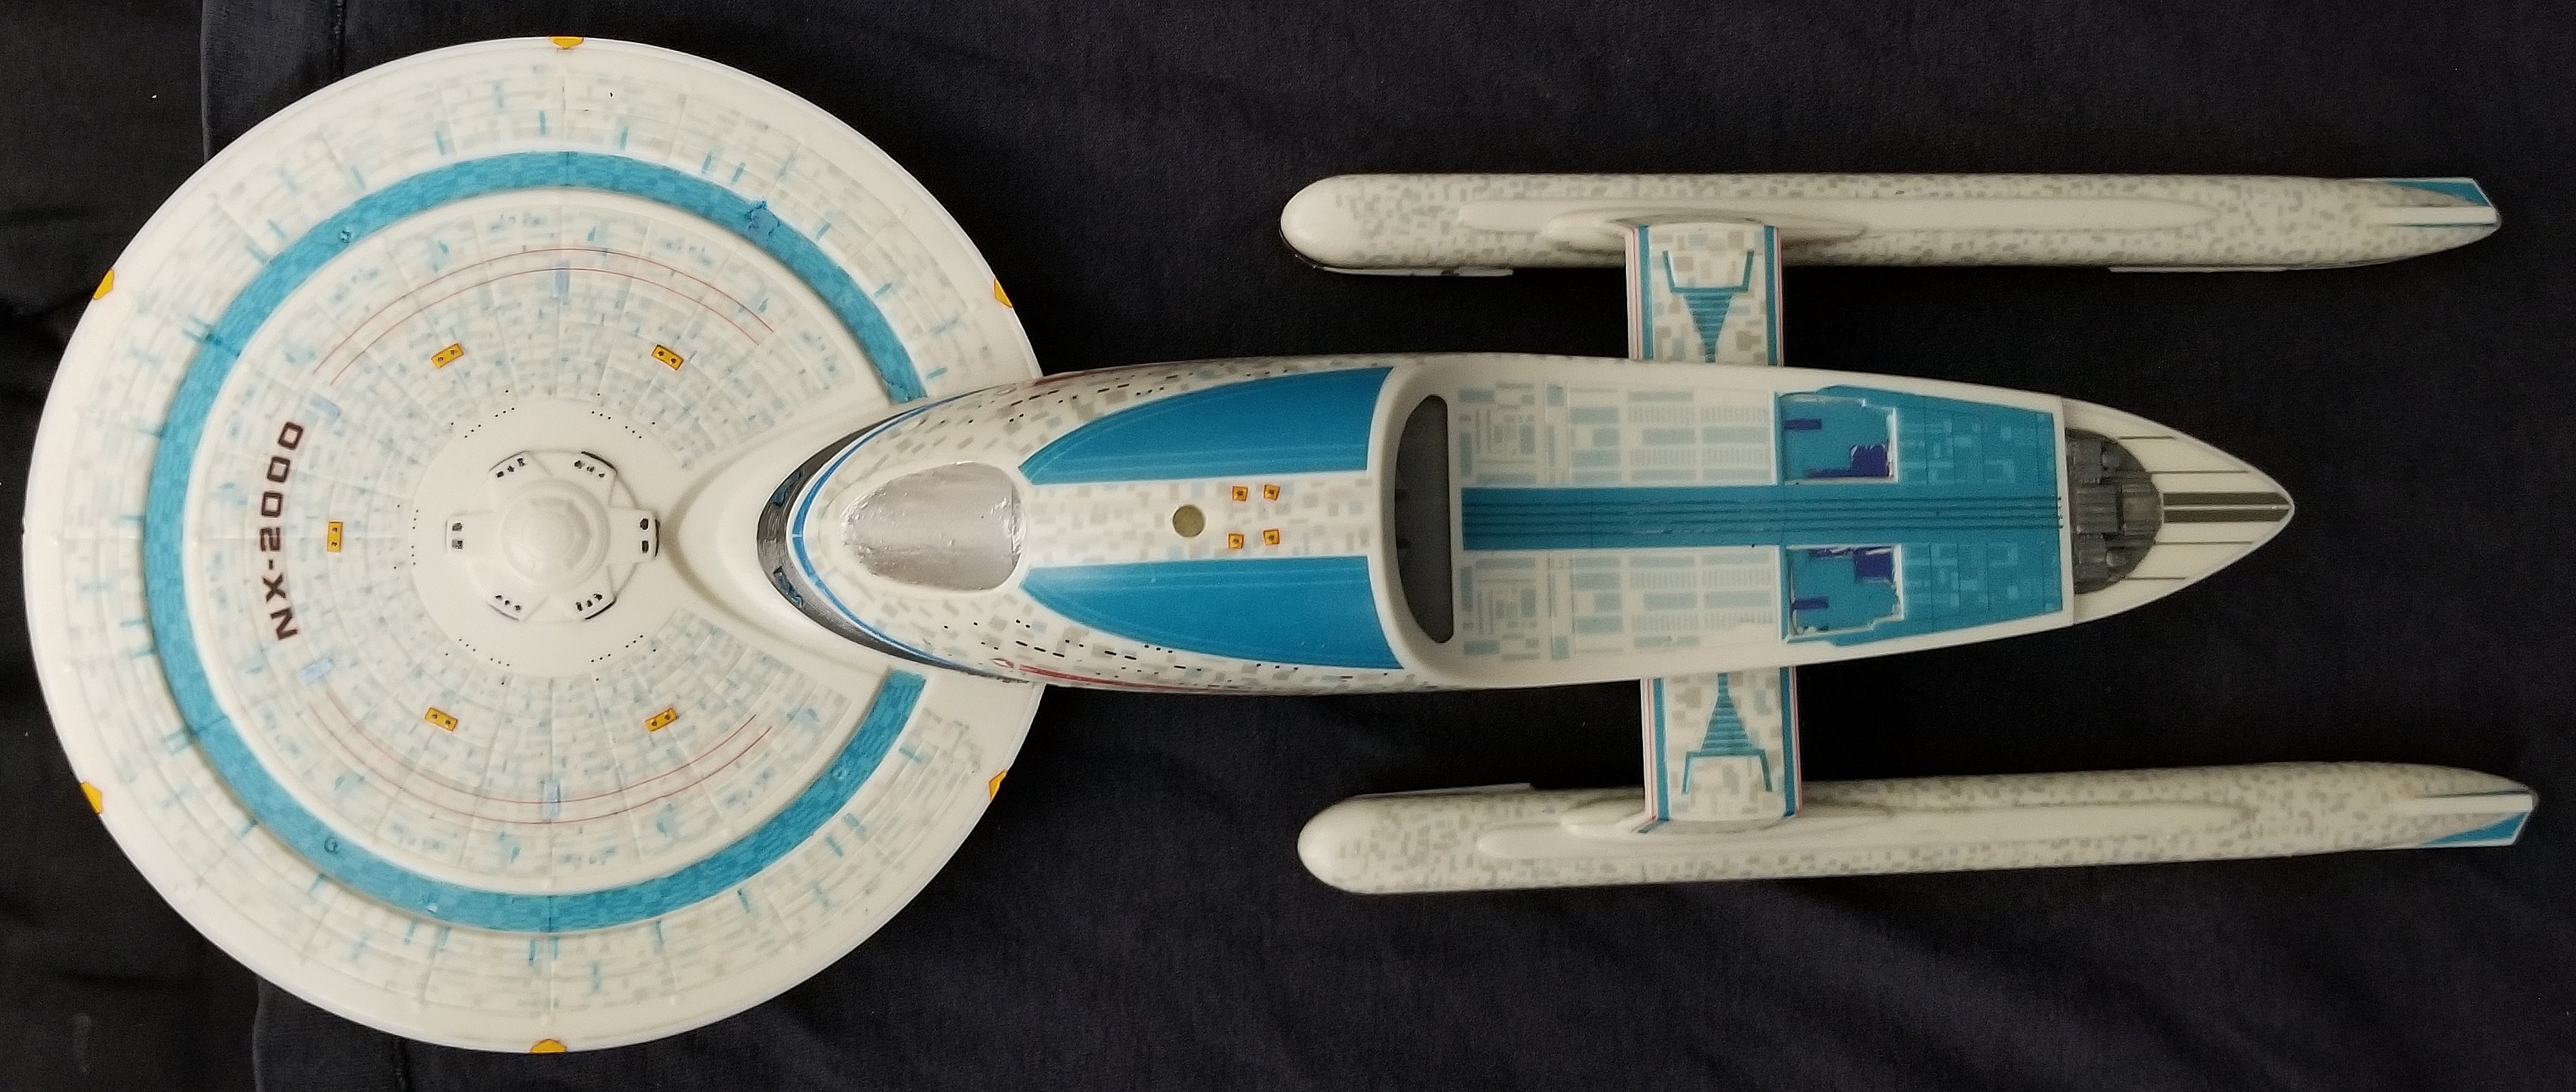 11000 Uss Excelsior Nx 2000 Scale Model Addict